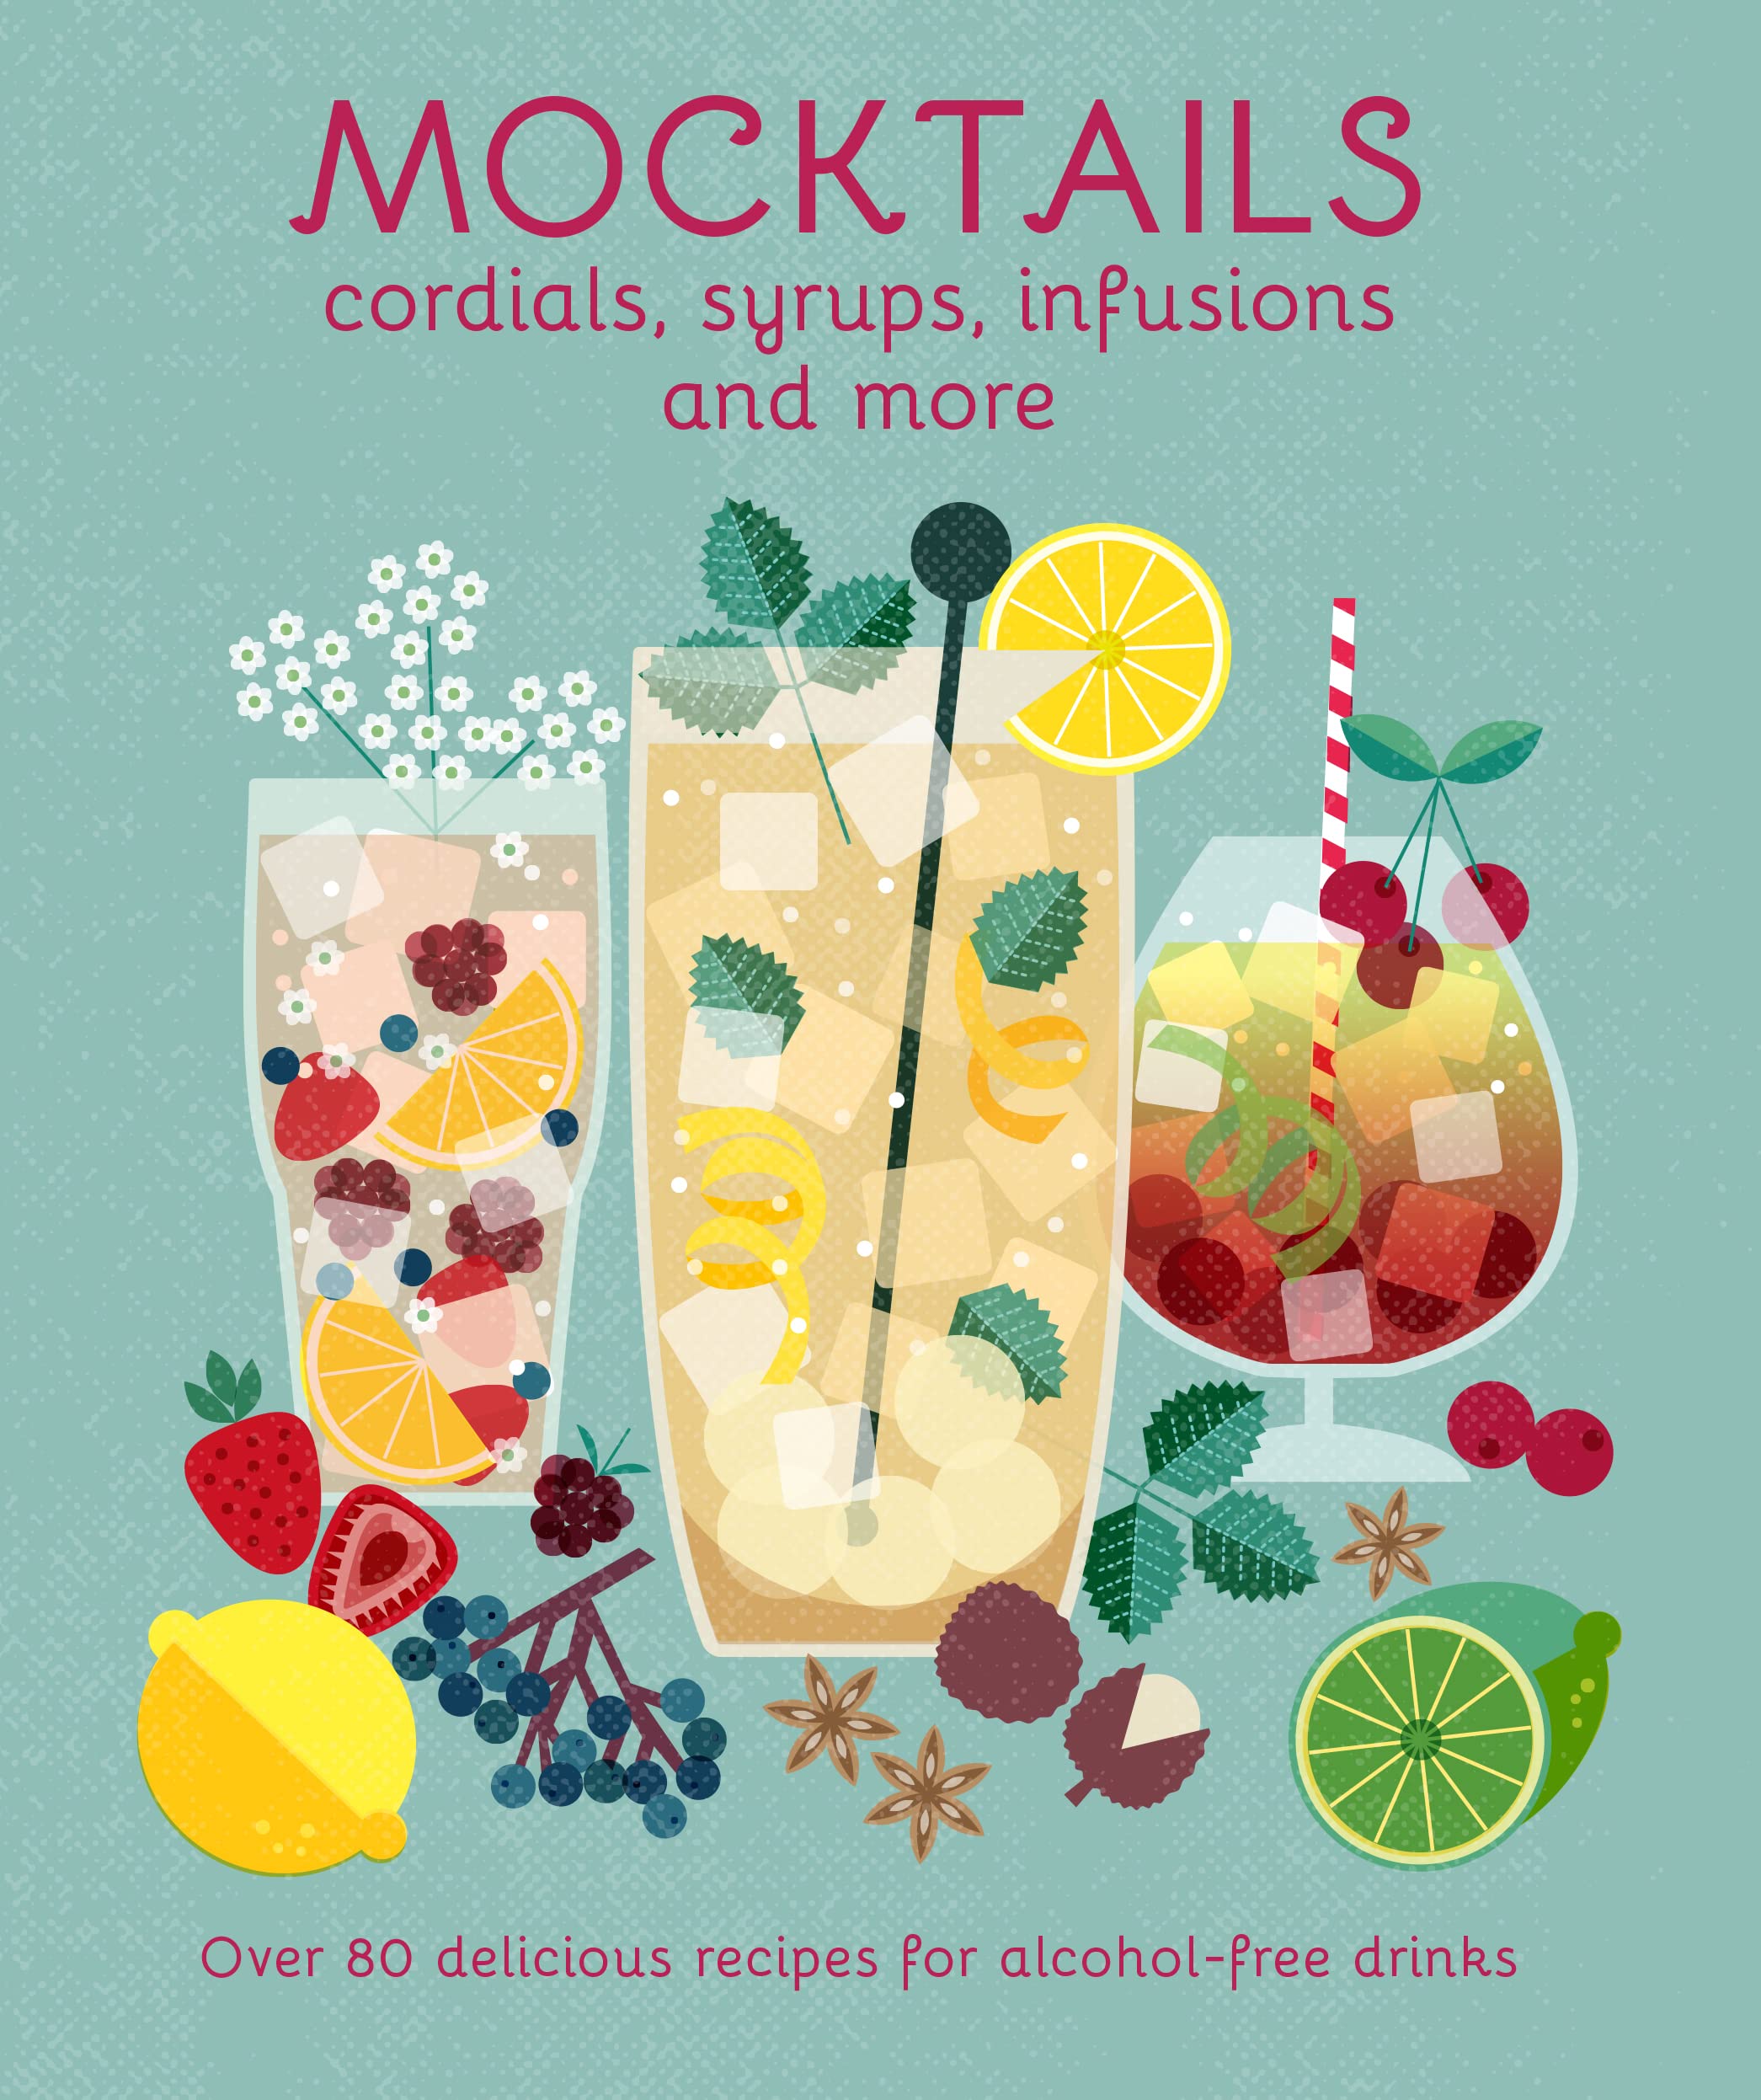 Mocktails, Cordials, Syrups, Infusions and More: Over 80 Delicious Recipes for Alcohol-free Drinks (Ryland Peters & Small)